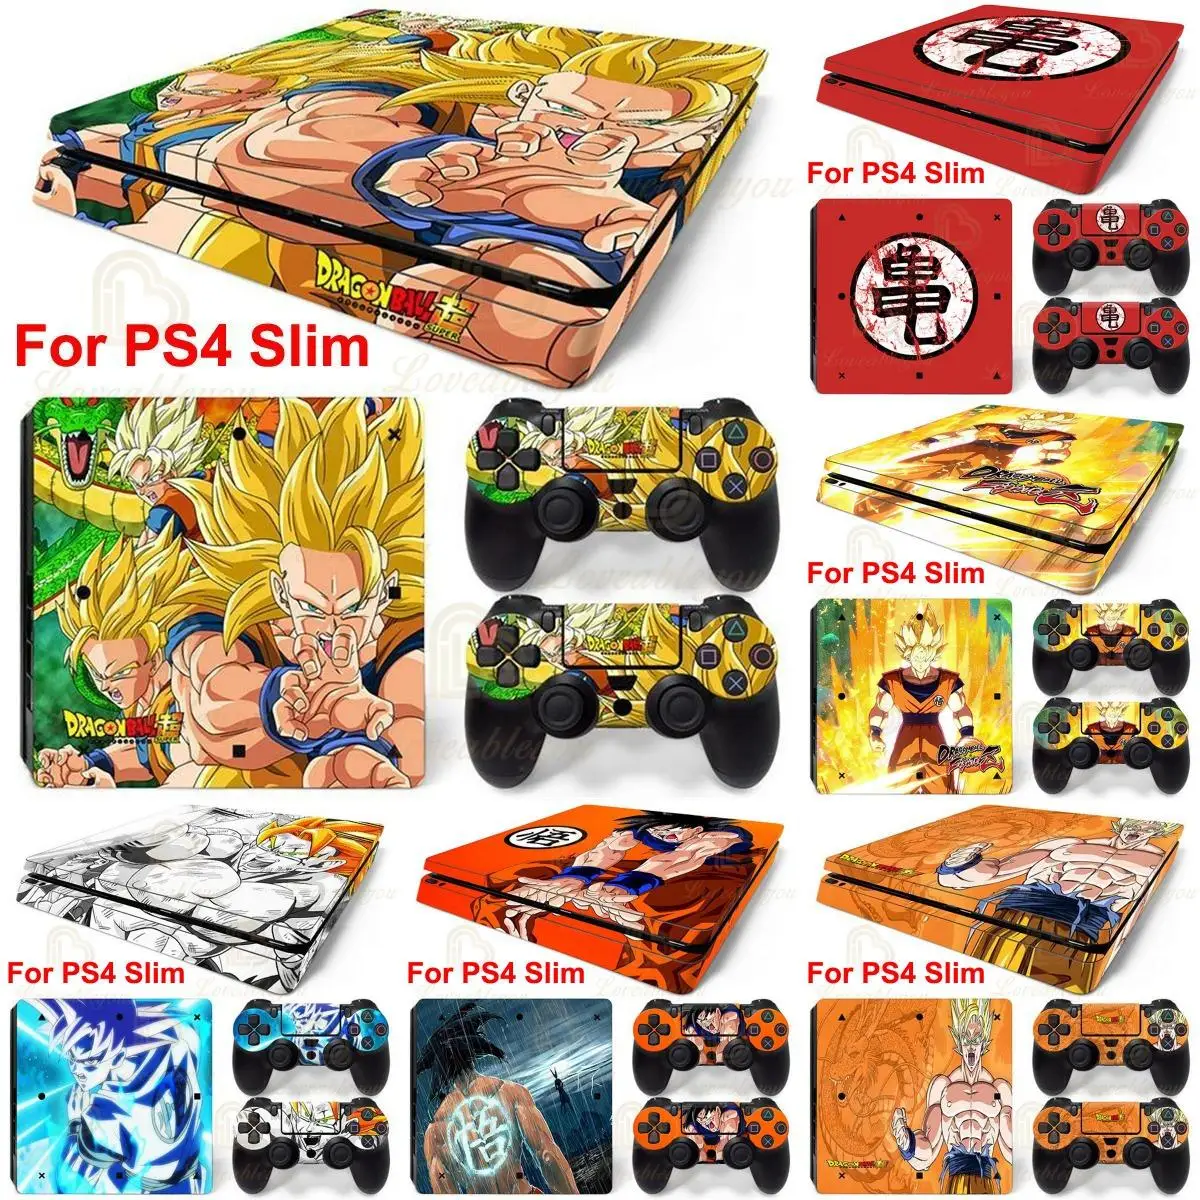 

Dragon Ball Z Console Stickers For SONY PS4 Pro Slim Zamasu Son Goku Full Body Skin Decals For PlayStation 4 Controller Gamepad